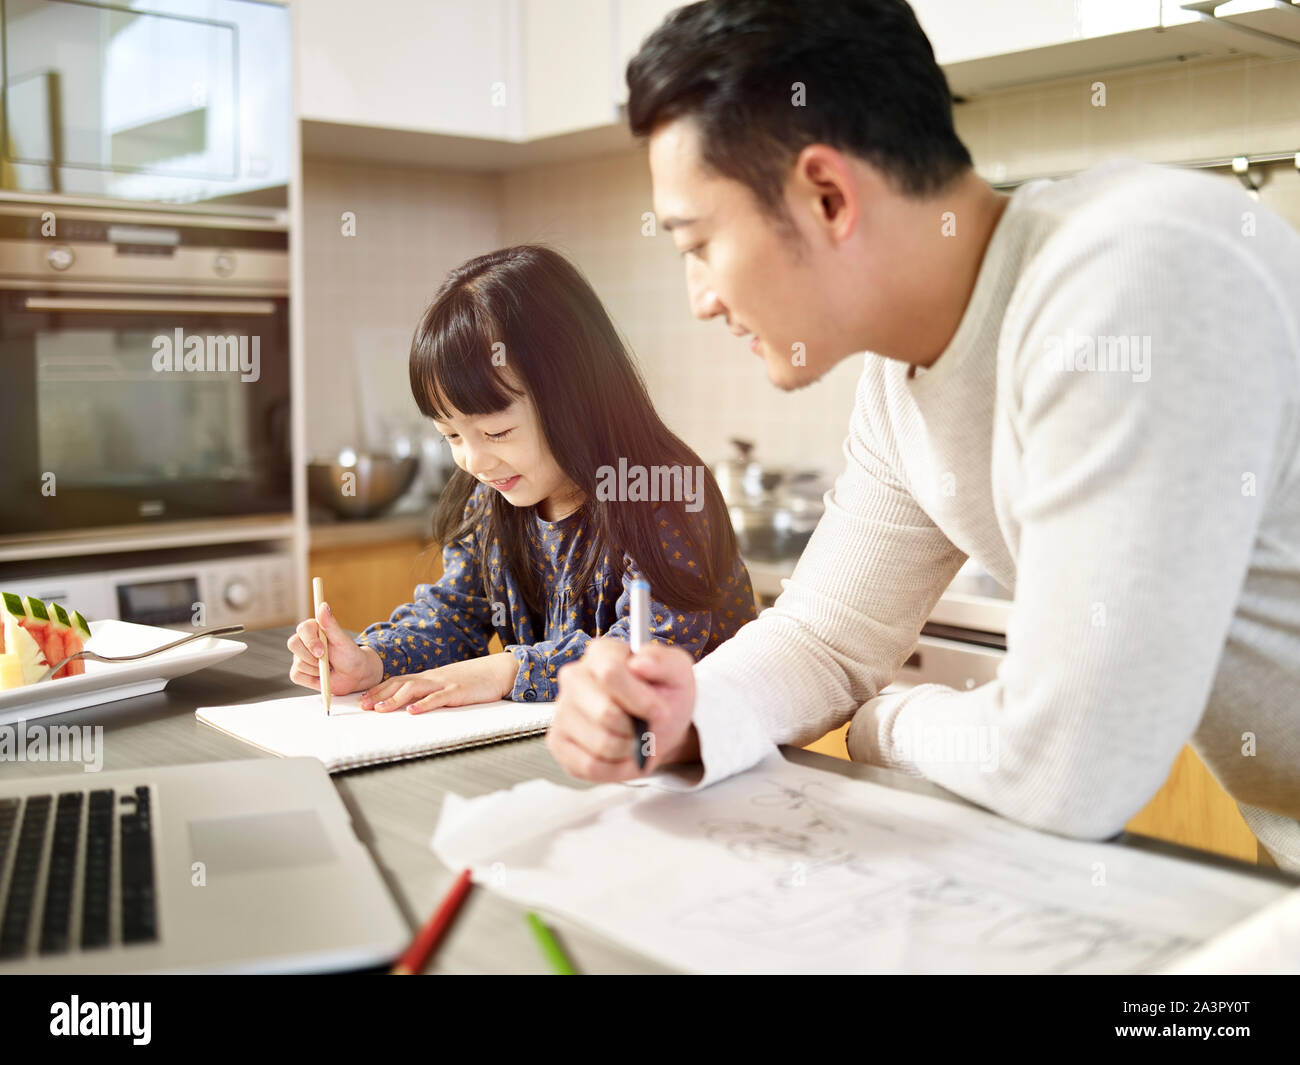 young asian man free lance designer father working at home while taking care of daughter. Stock Photo